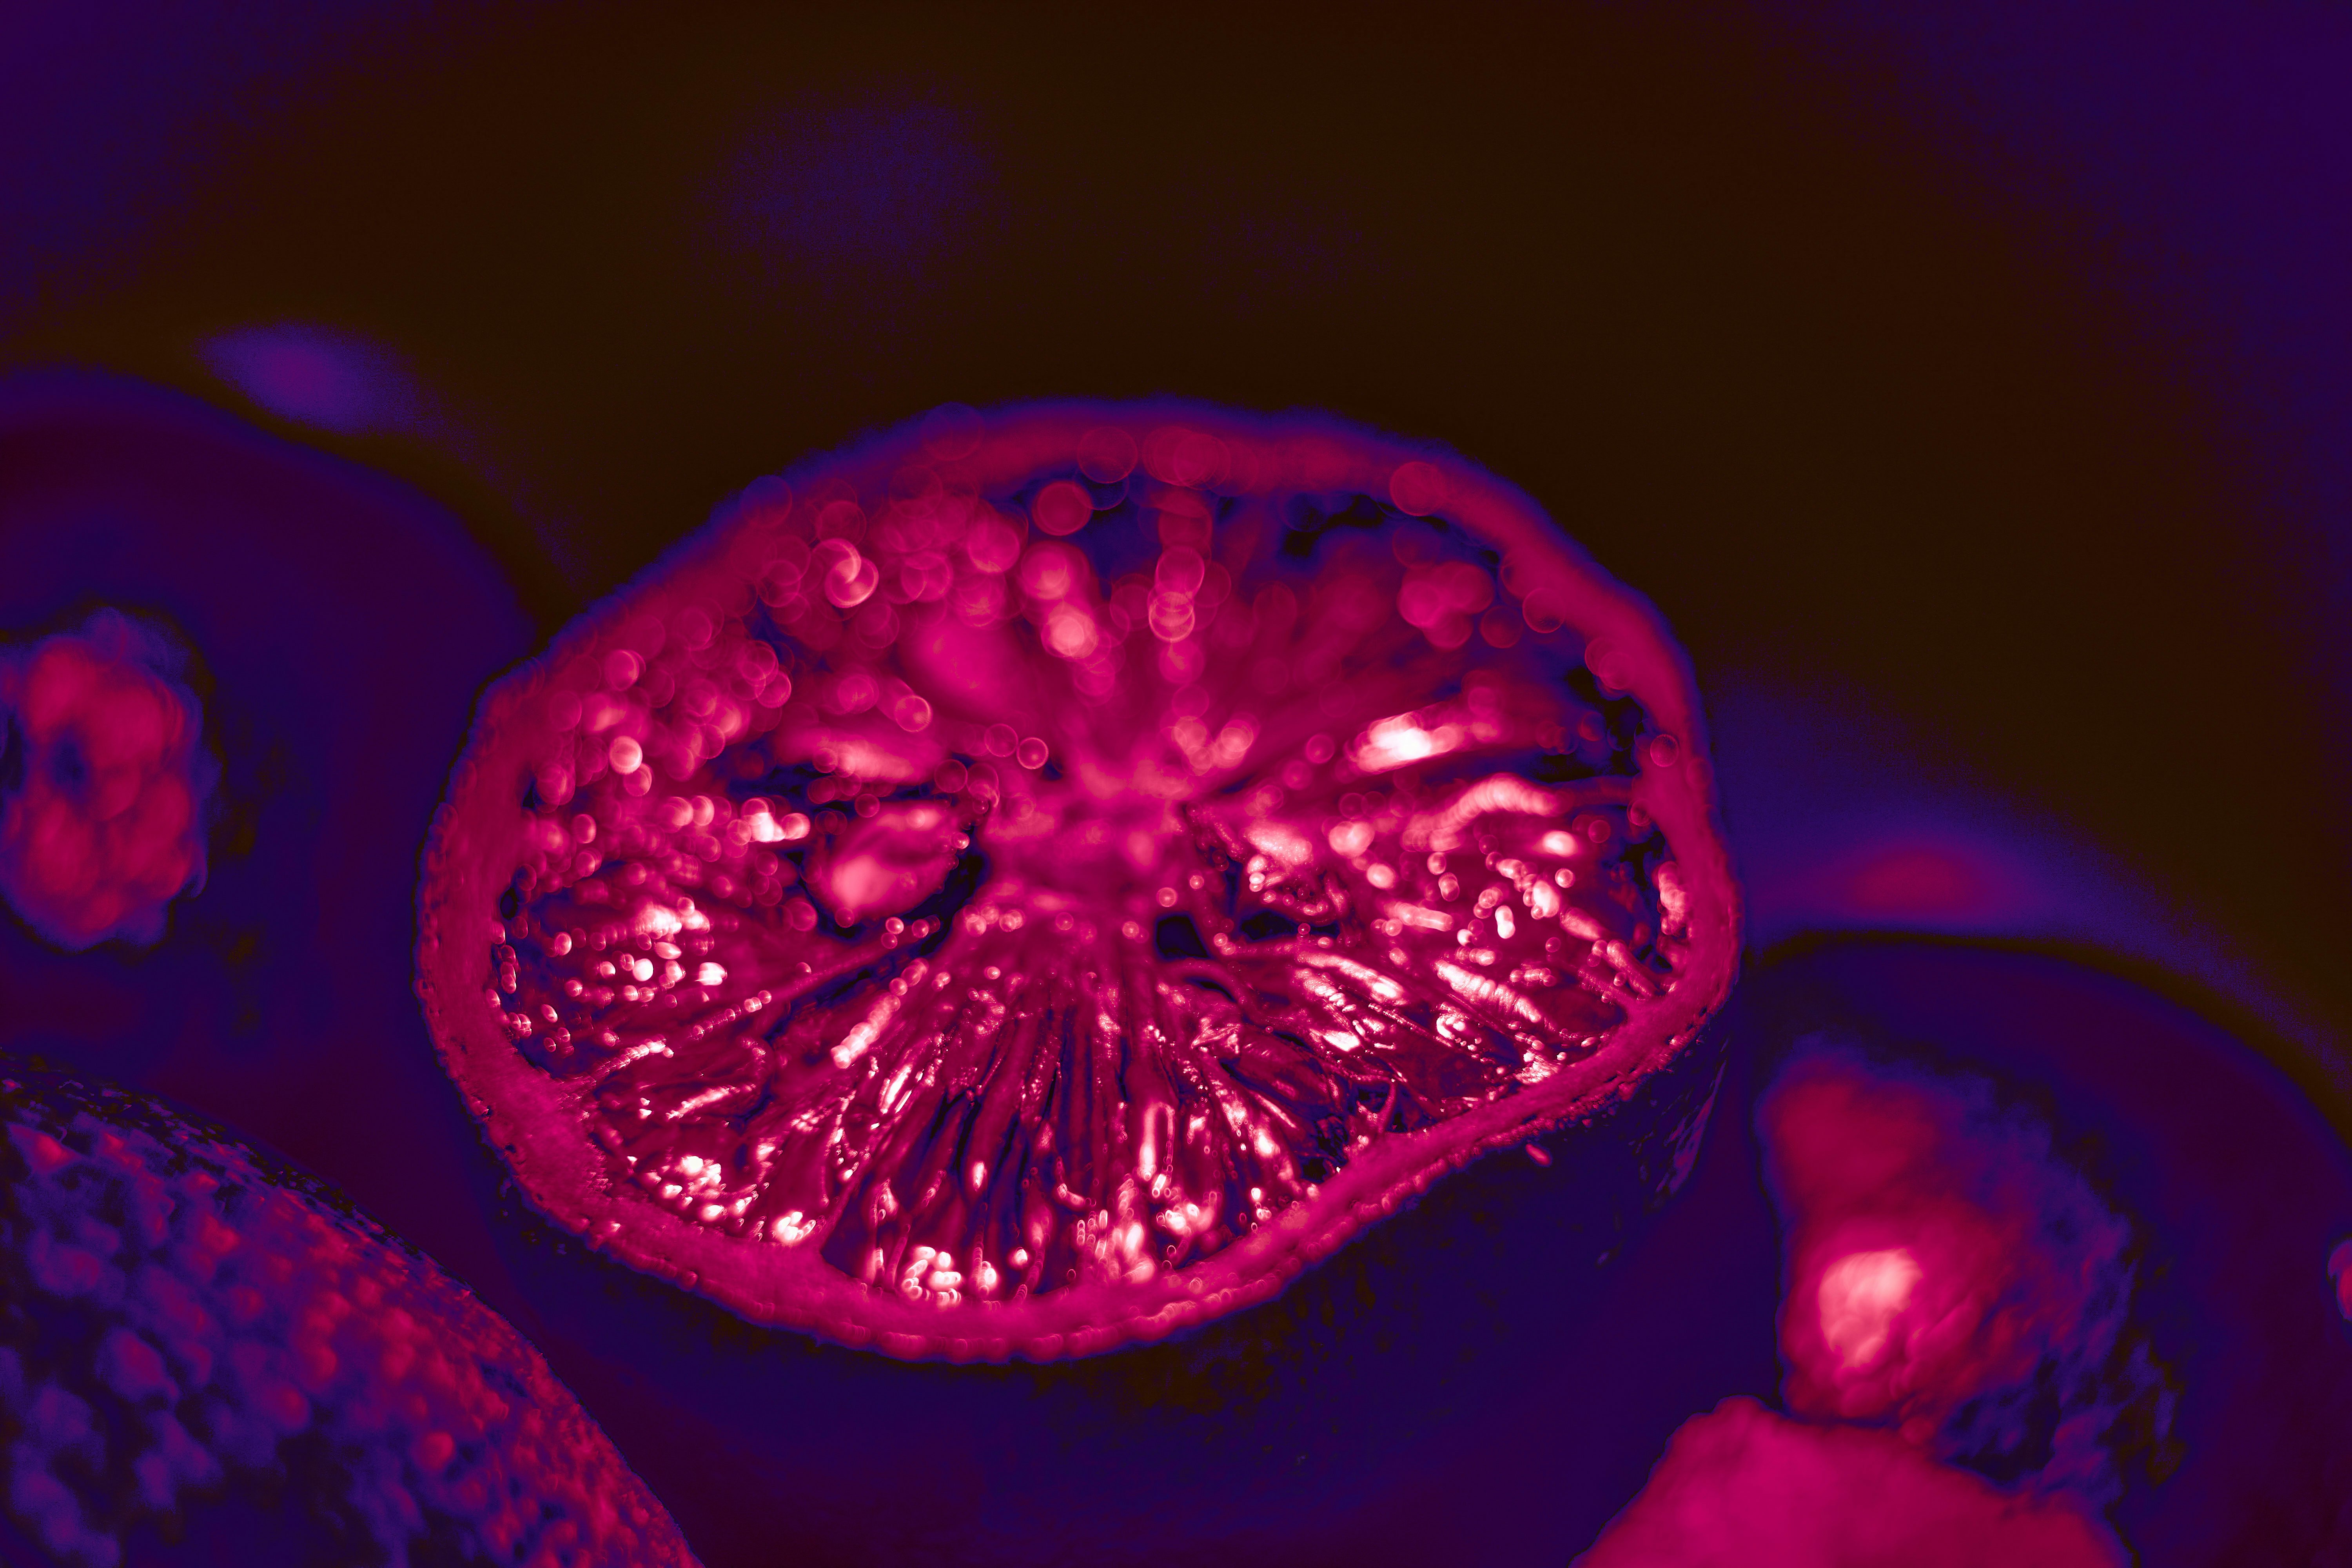 red fruit with water droplets